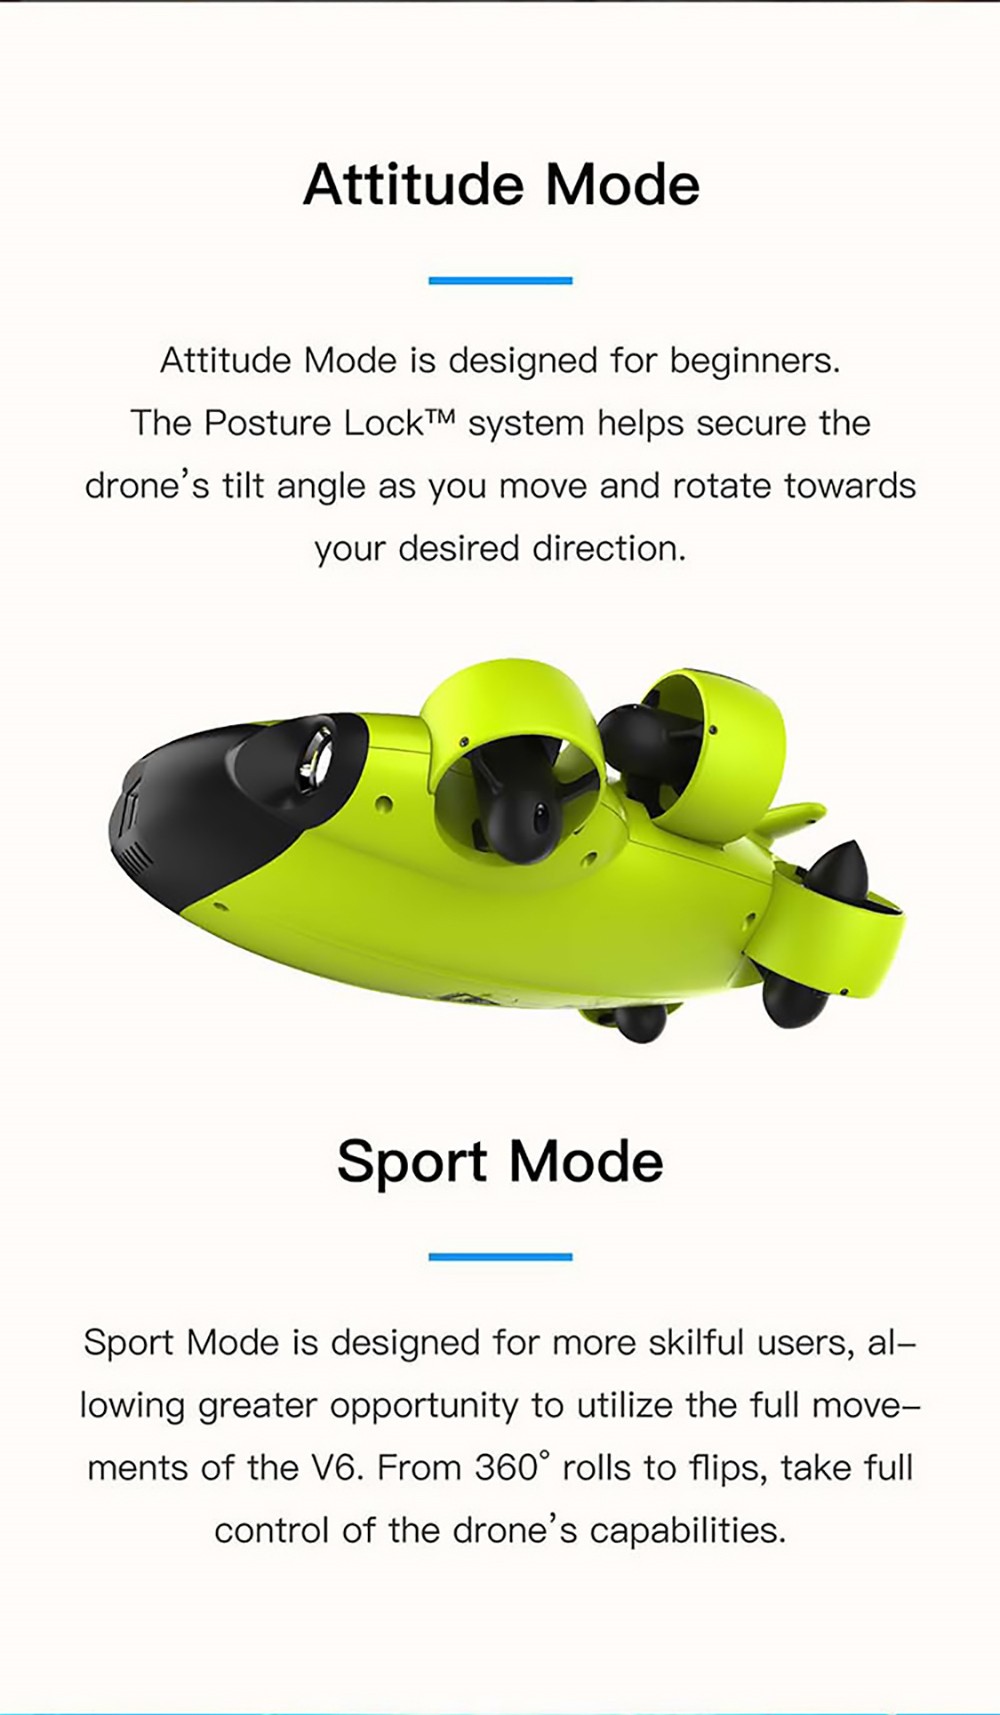 FIFISH V6 Underwater Robot with 4K UHD Camera 4 Hours Working Time Head Tracking Immersive VR Control Underwater Drone